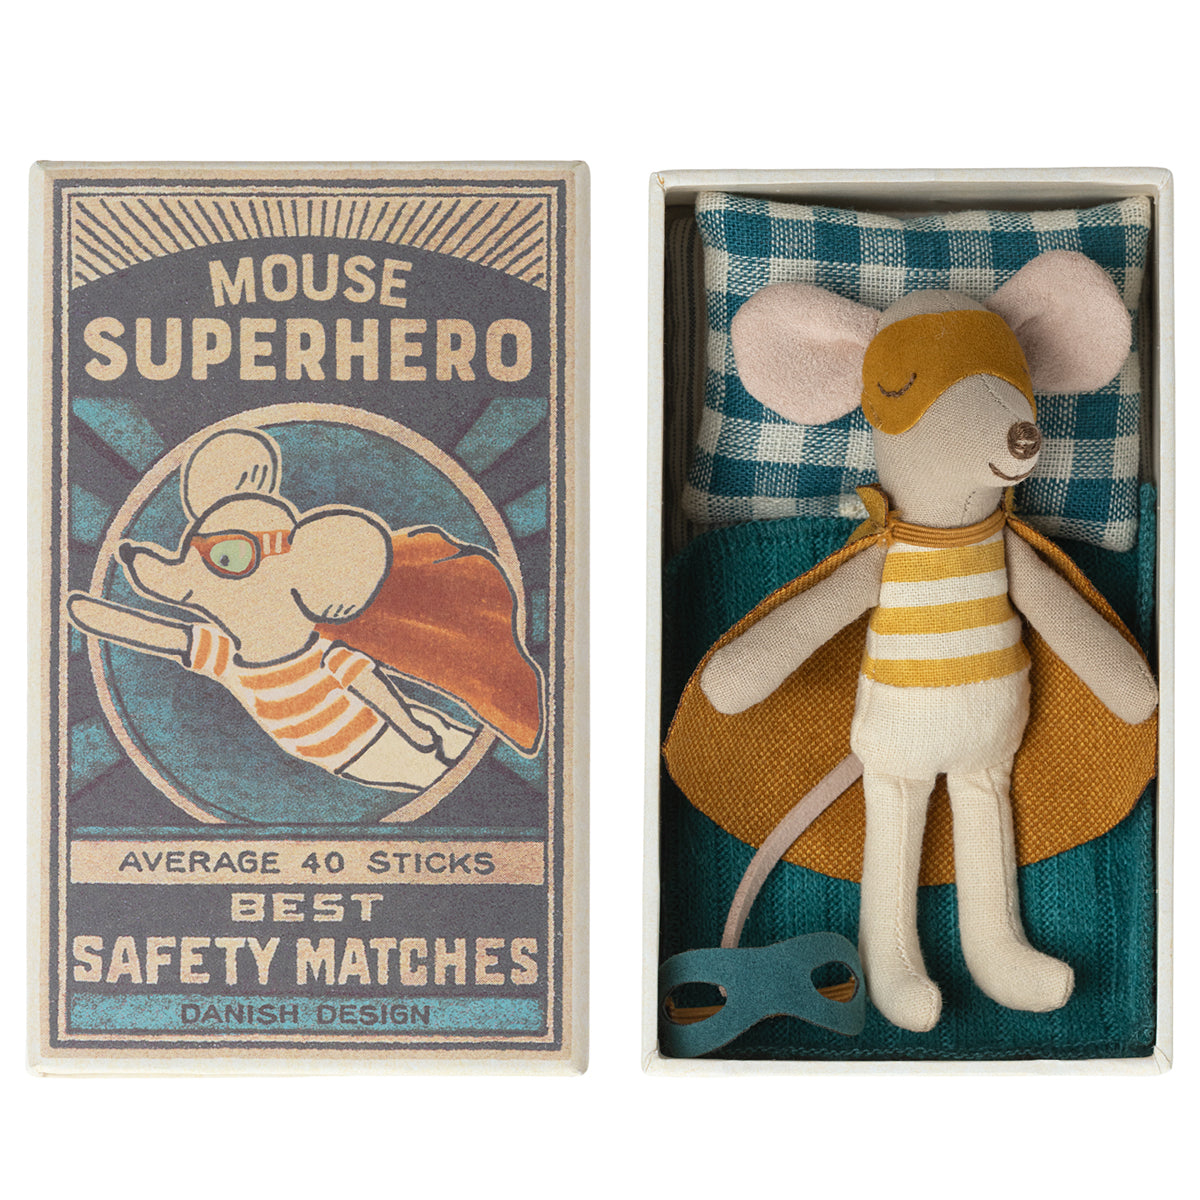 Superhero Mouse, Little brother in Matchbox